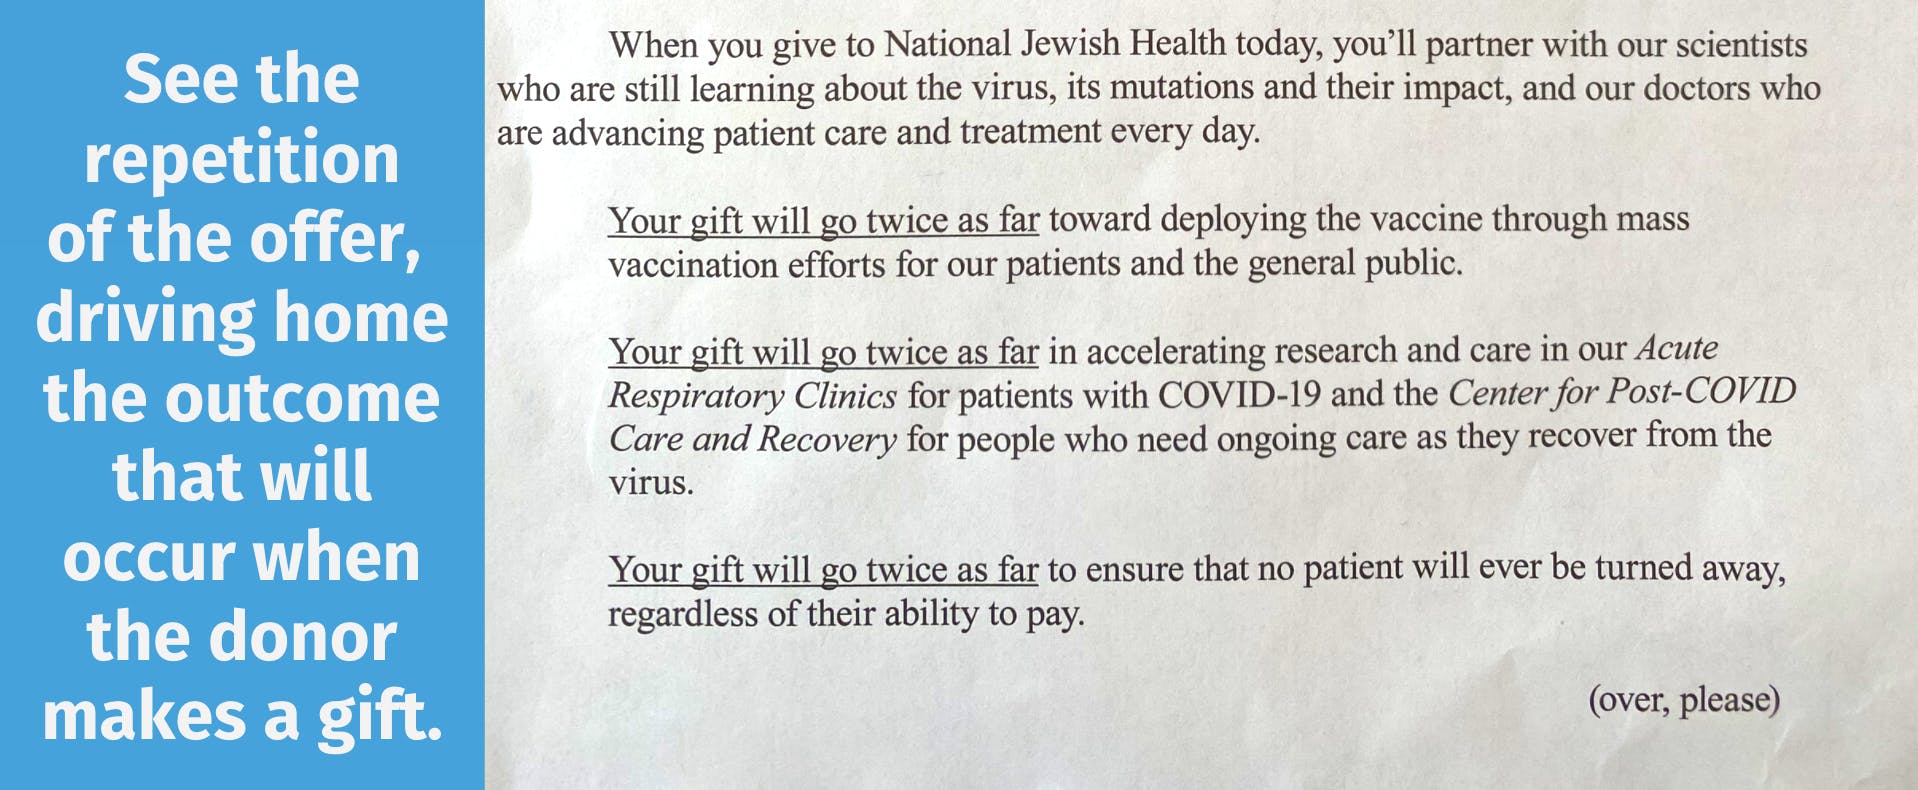 an excerpt of an appeal from National Jewish Health that repeats "your gift will go twice as far" three times, showing the outcome of a donor's gift